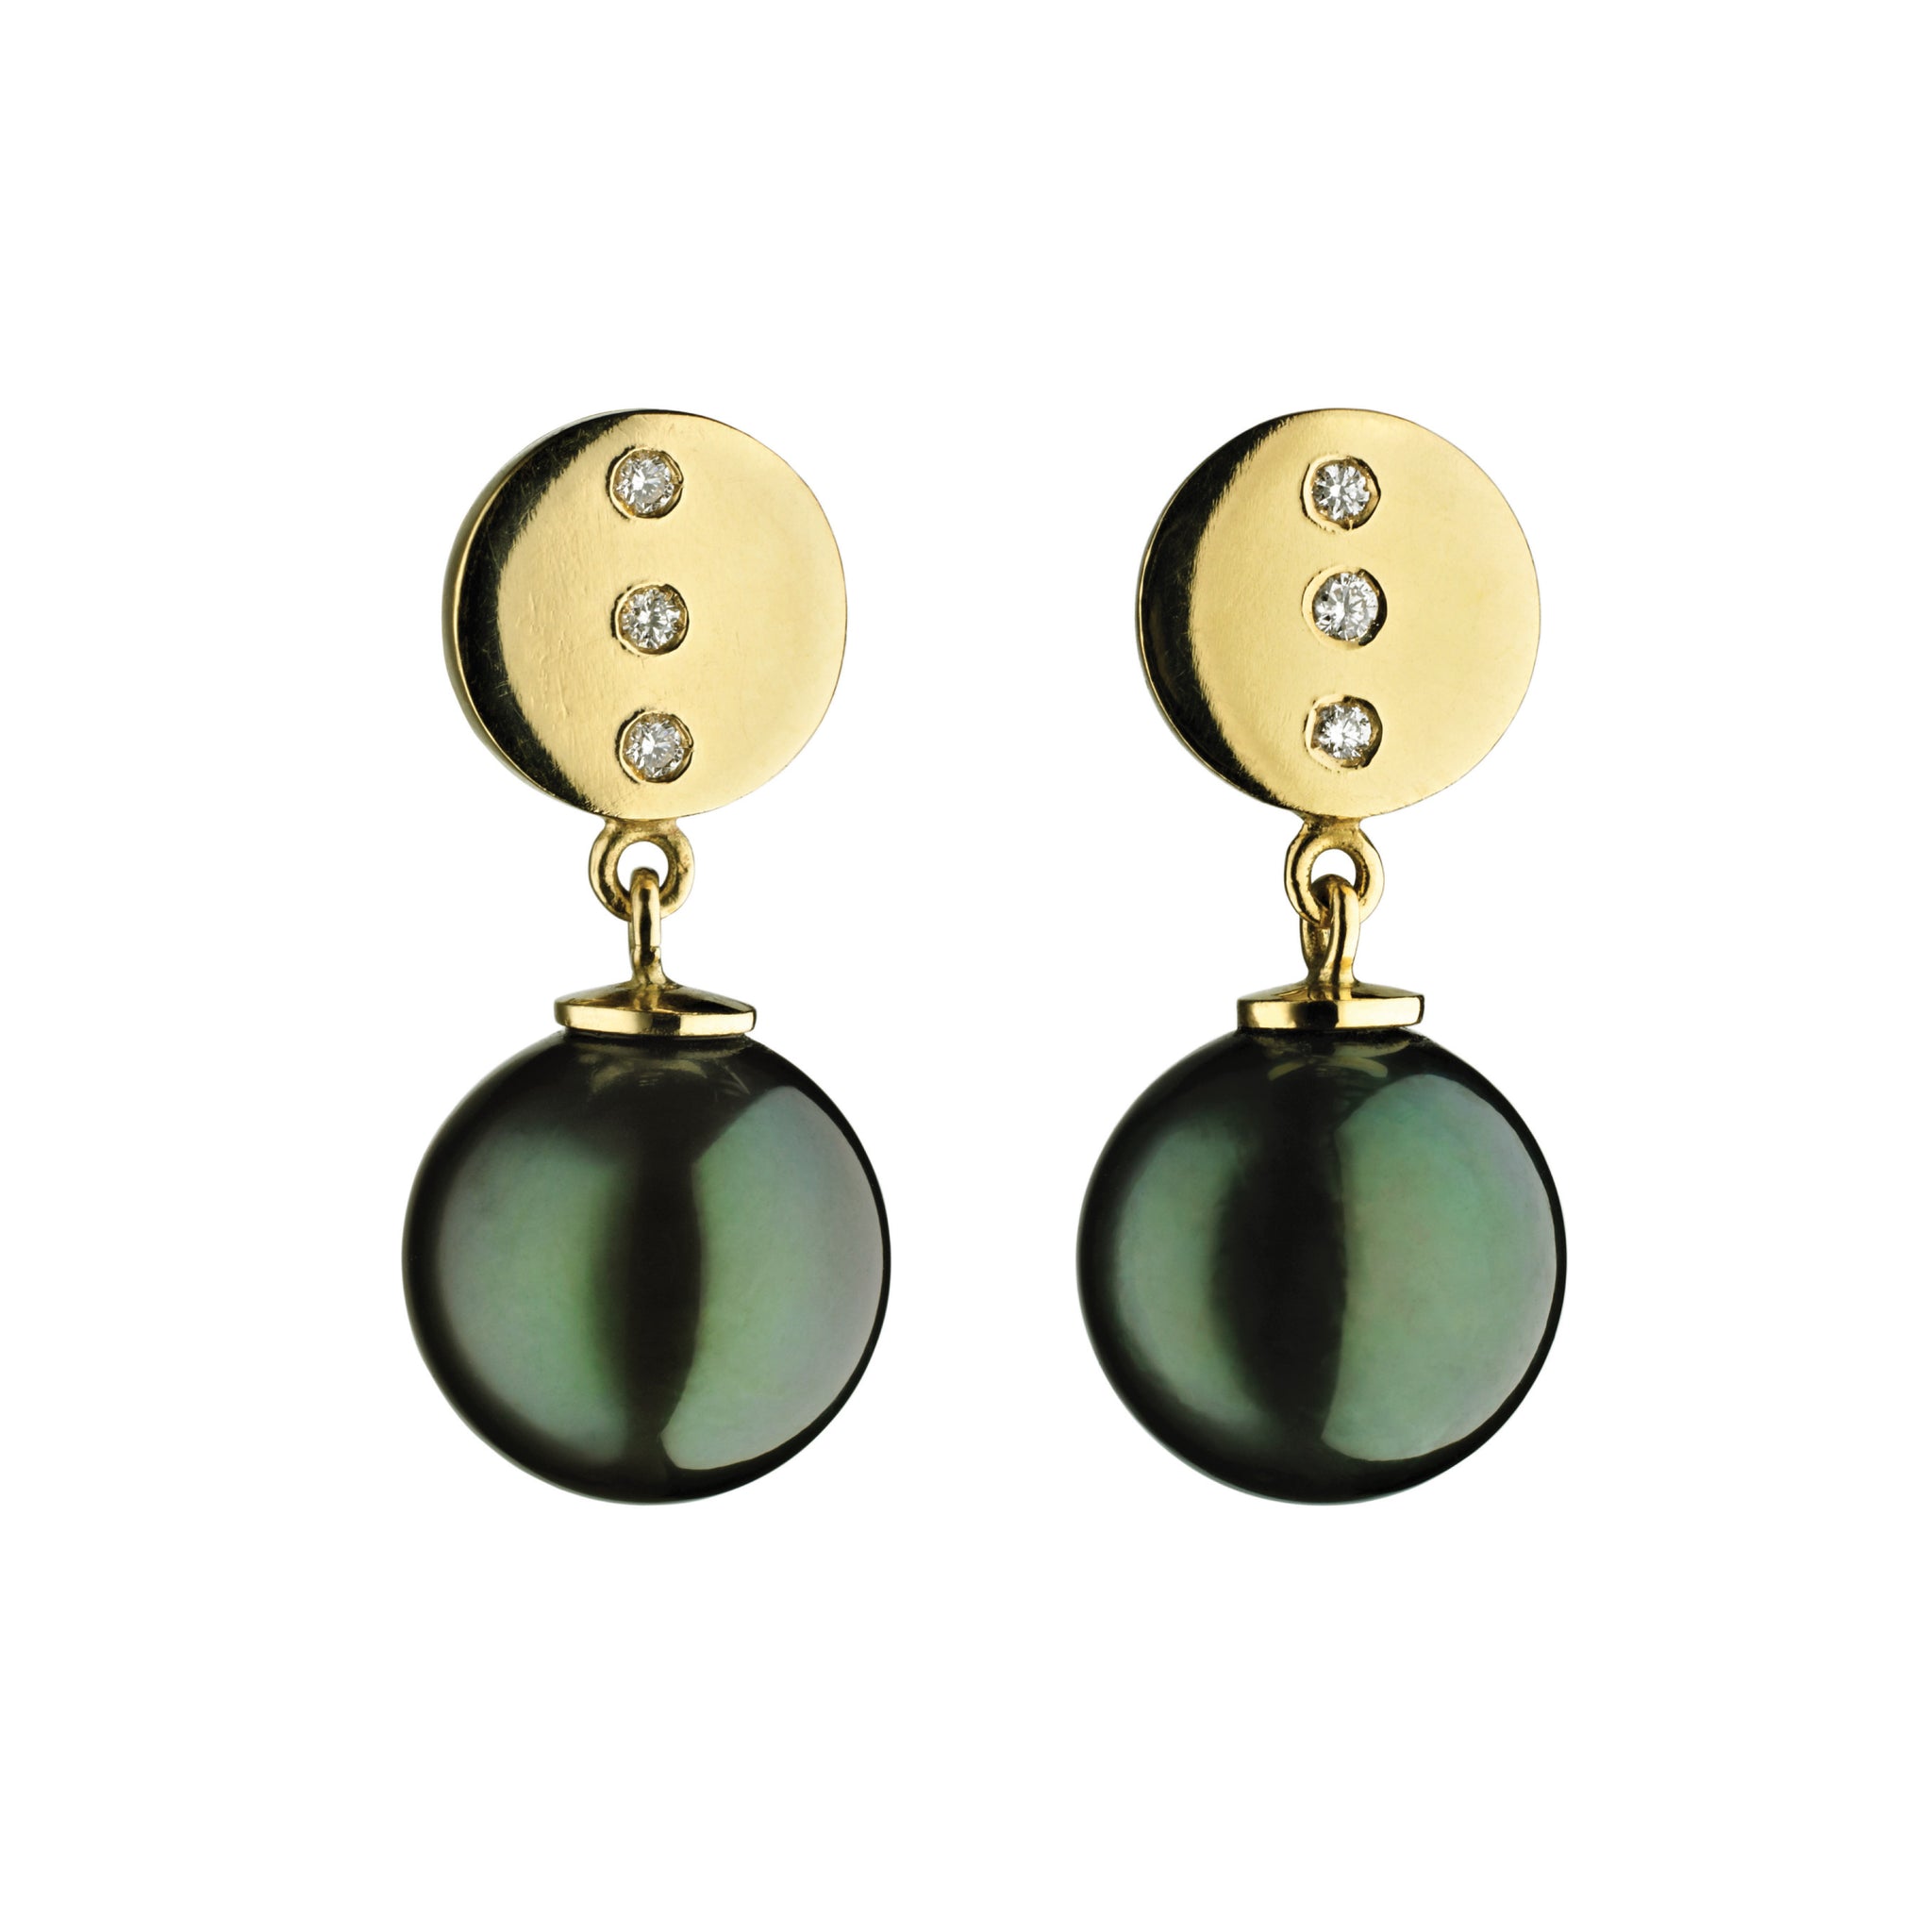 'Pearl Wonder' - Yellow gold earrings with diamonds and Tahitian pearls